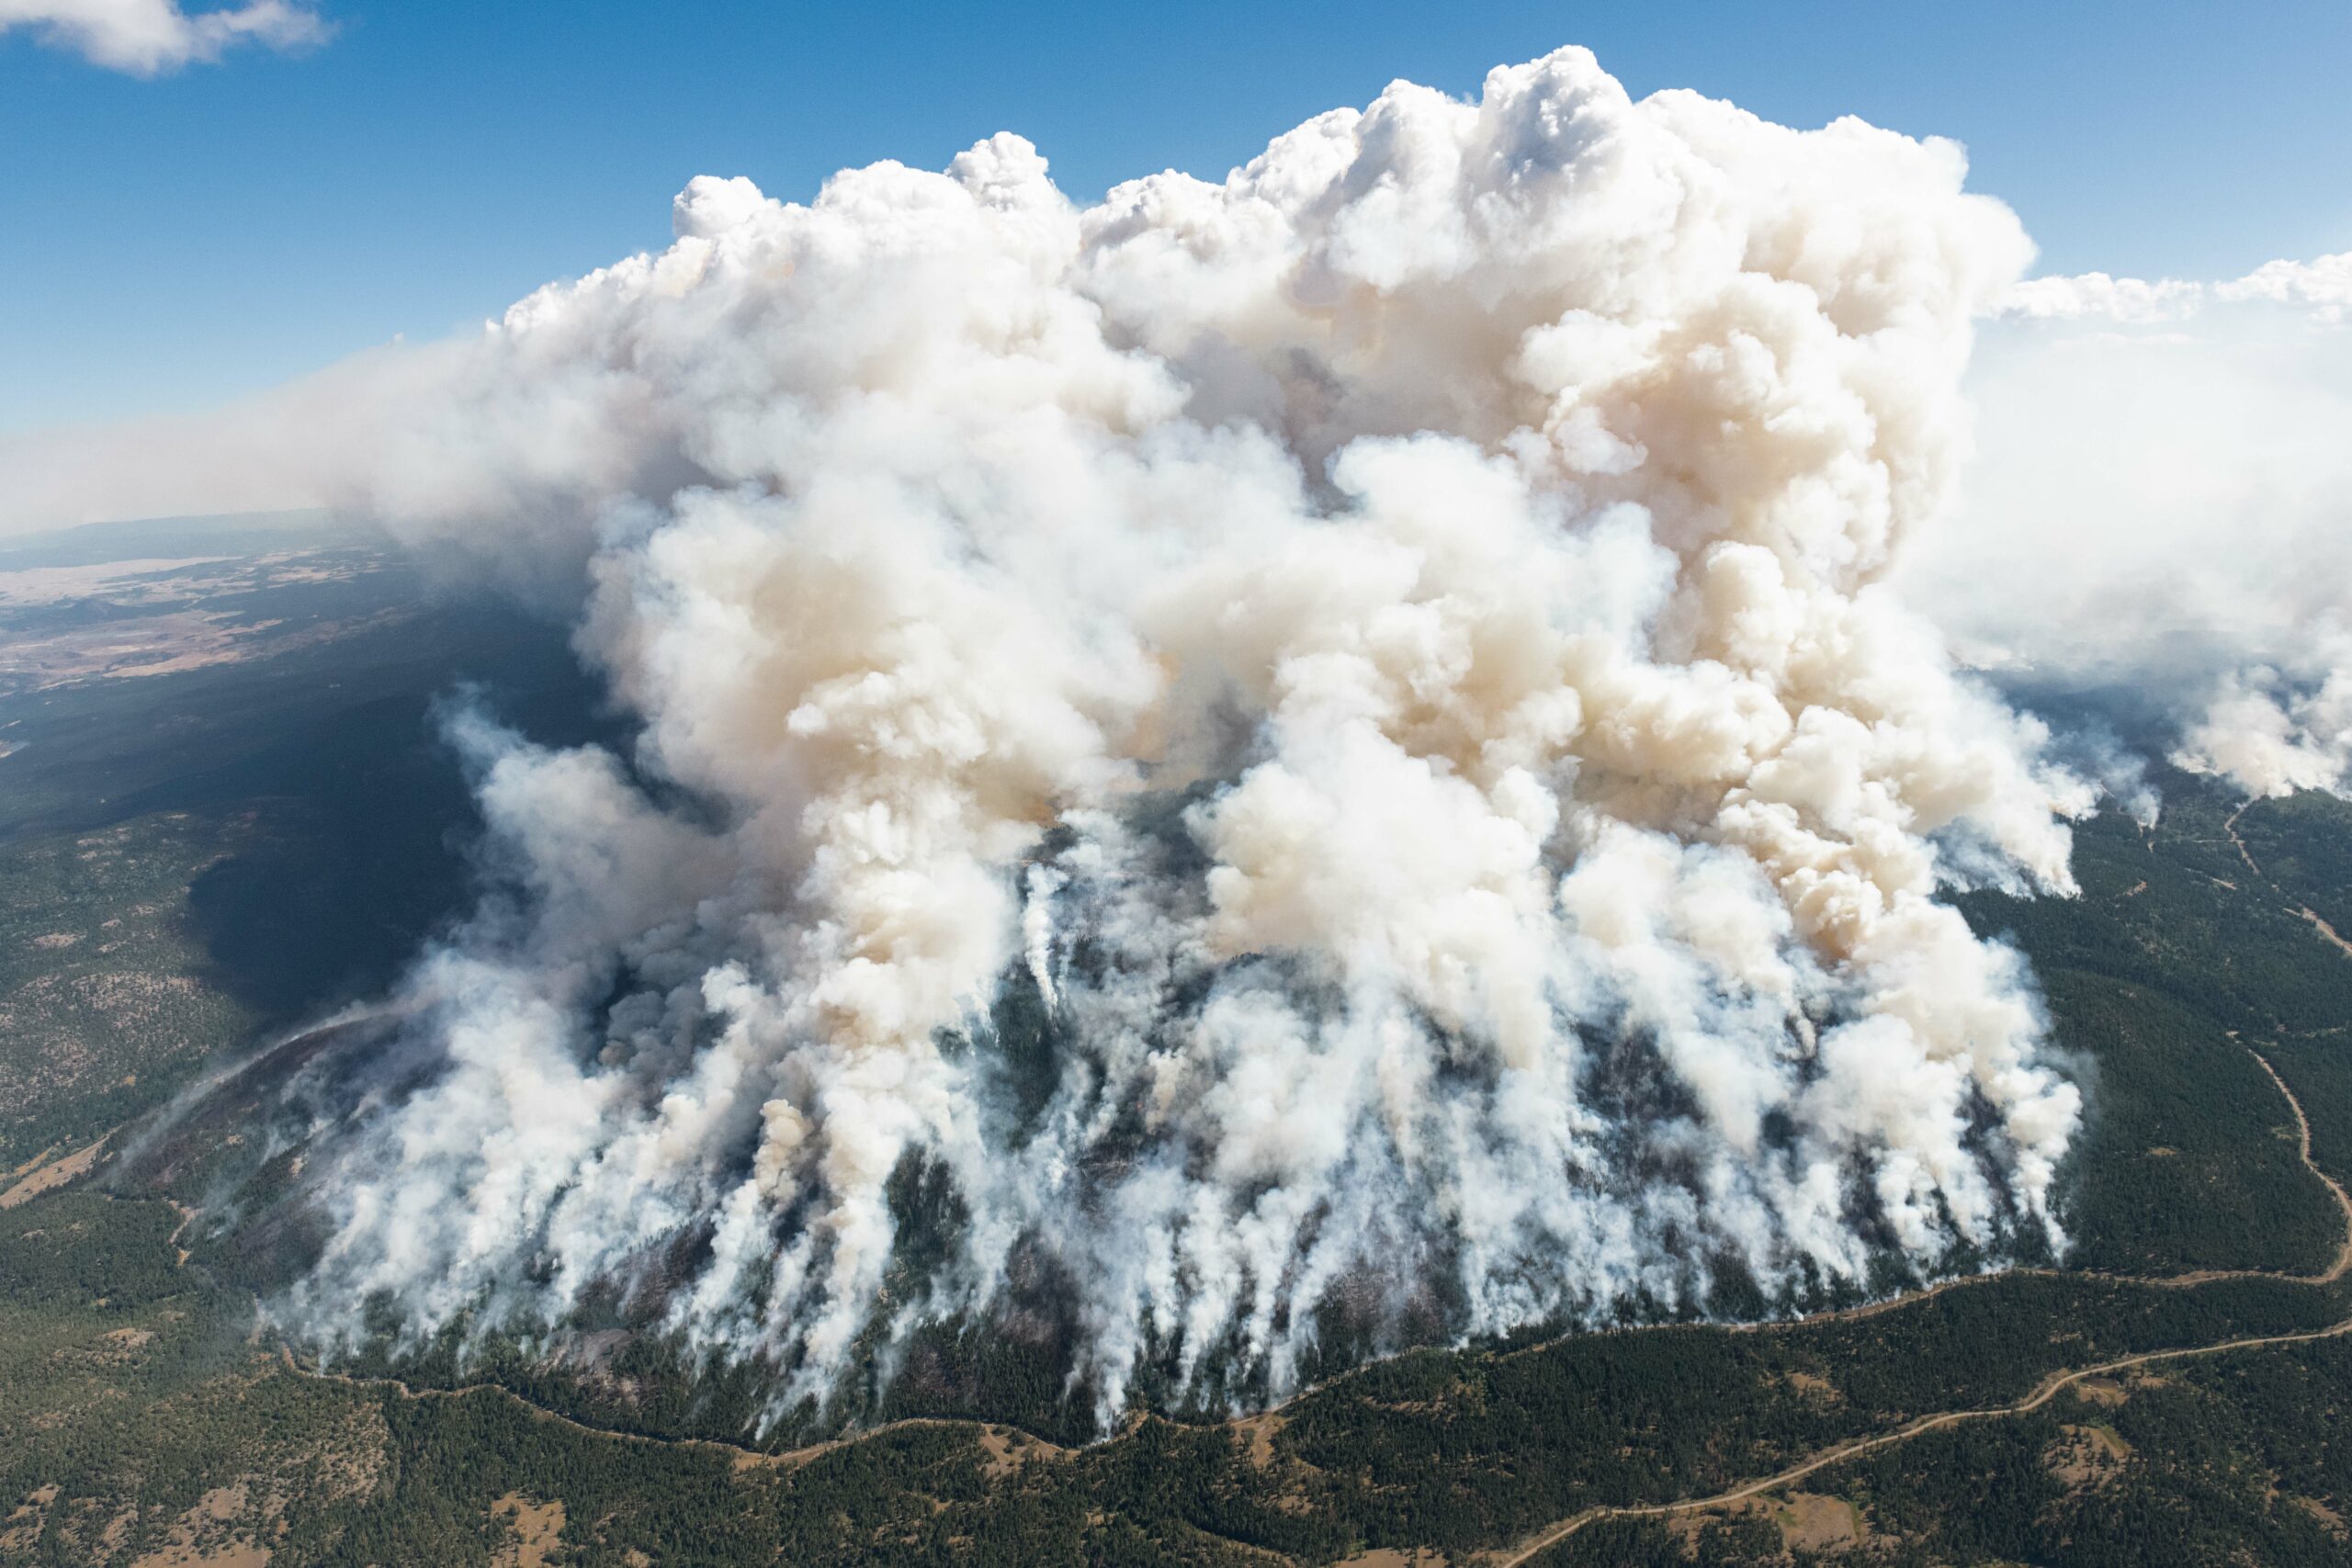 B.C. wildfires, climate adaptation